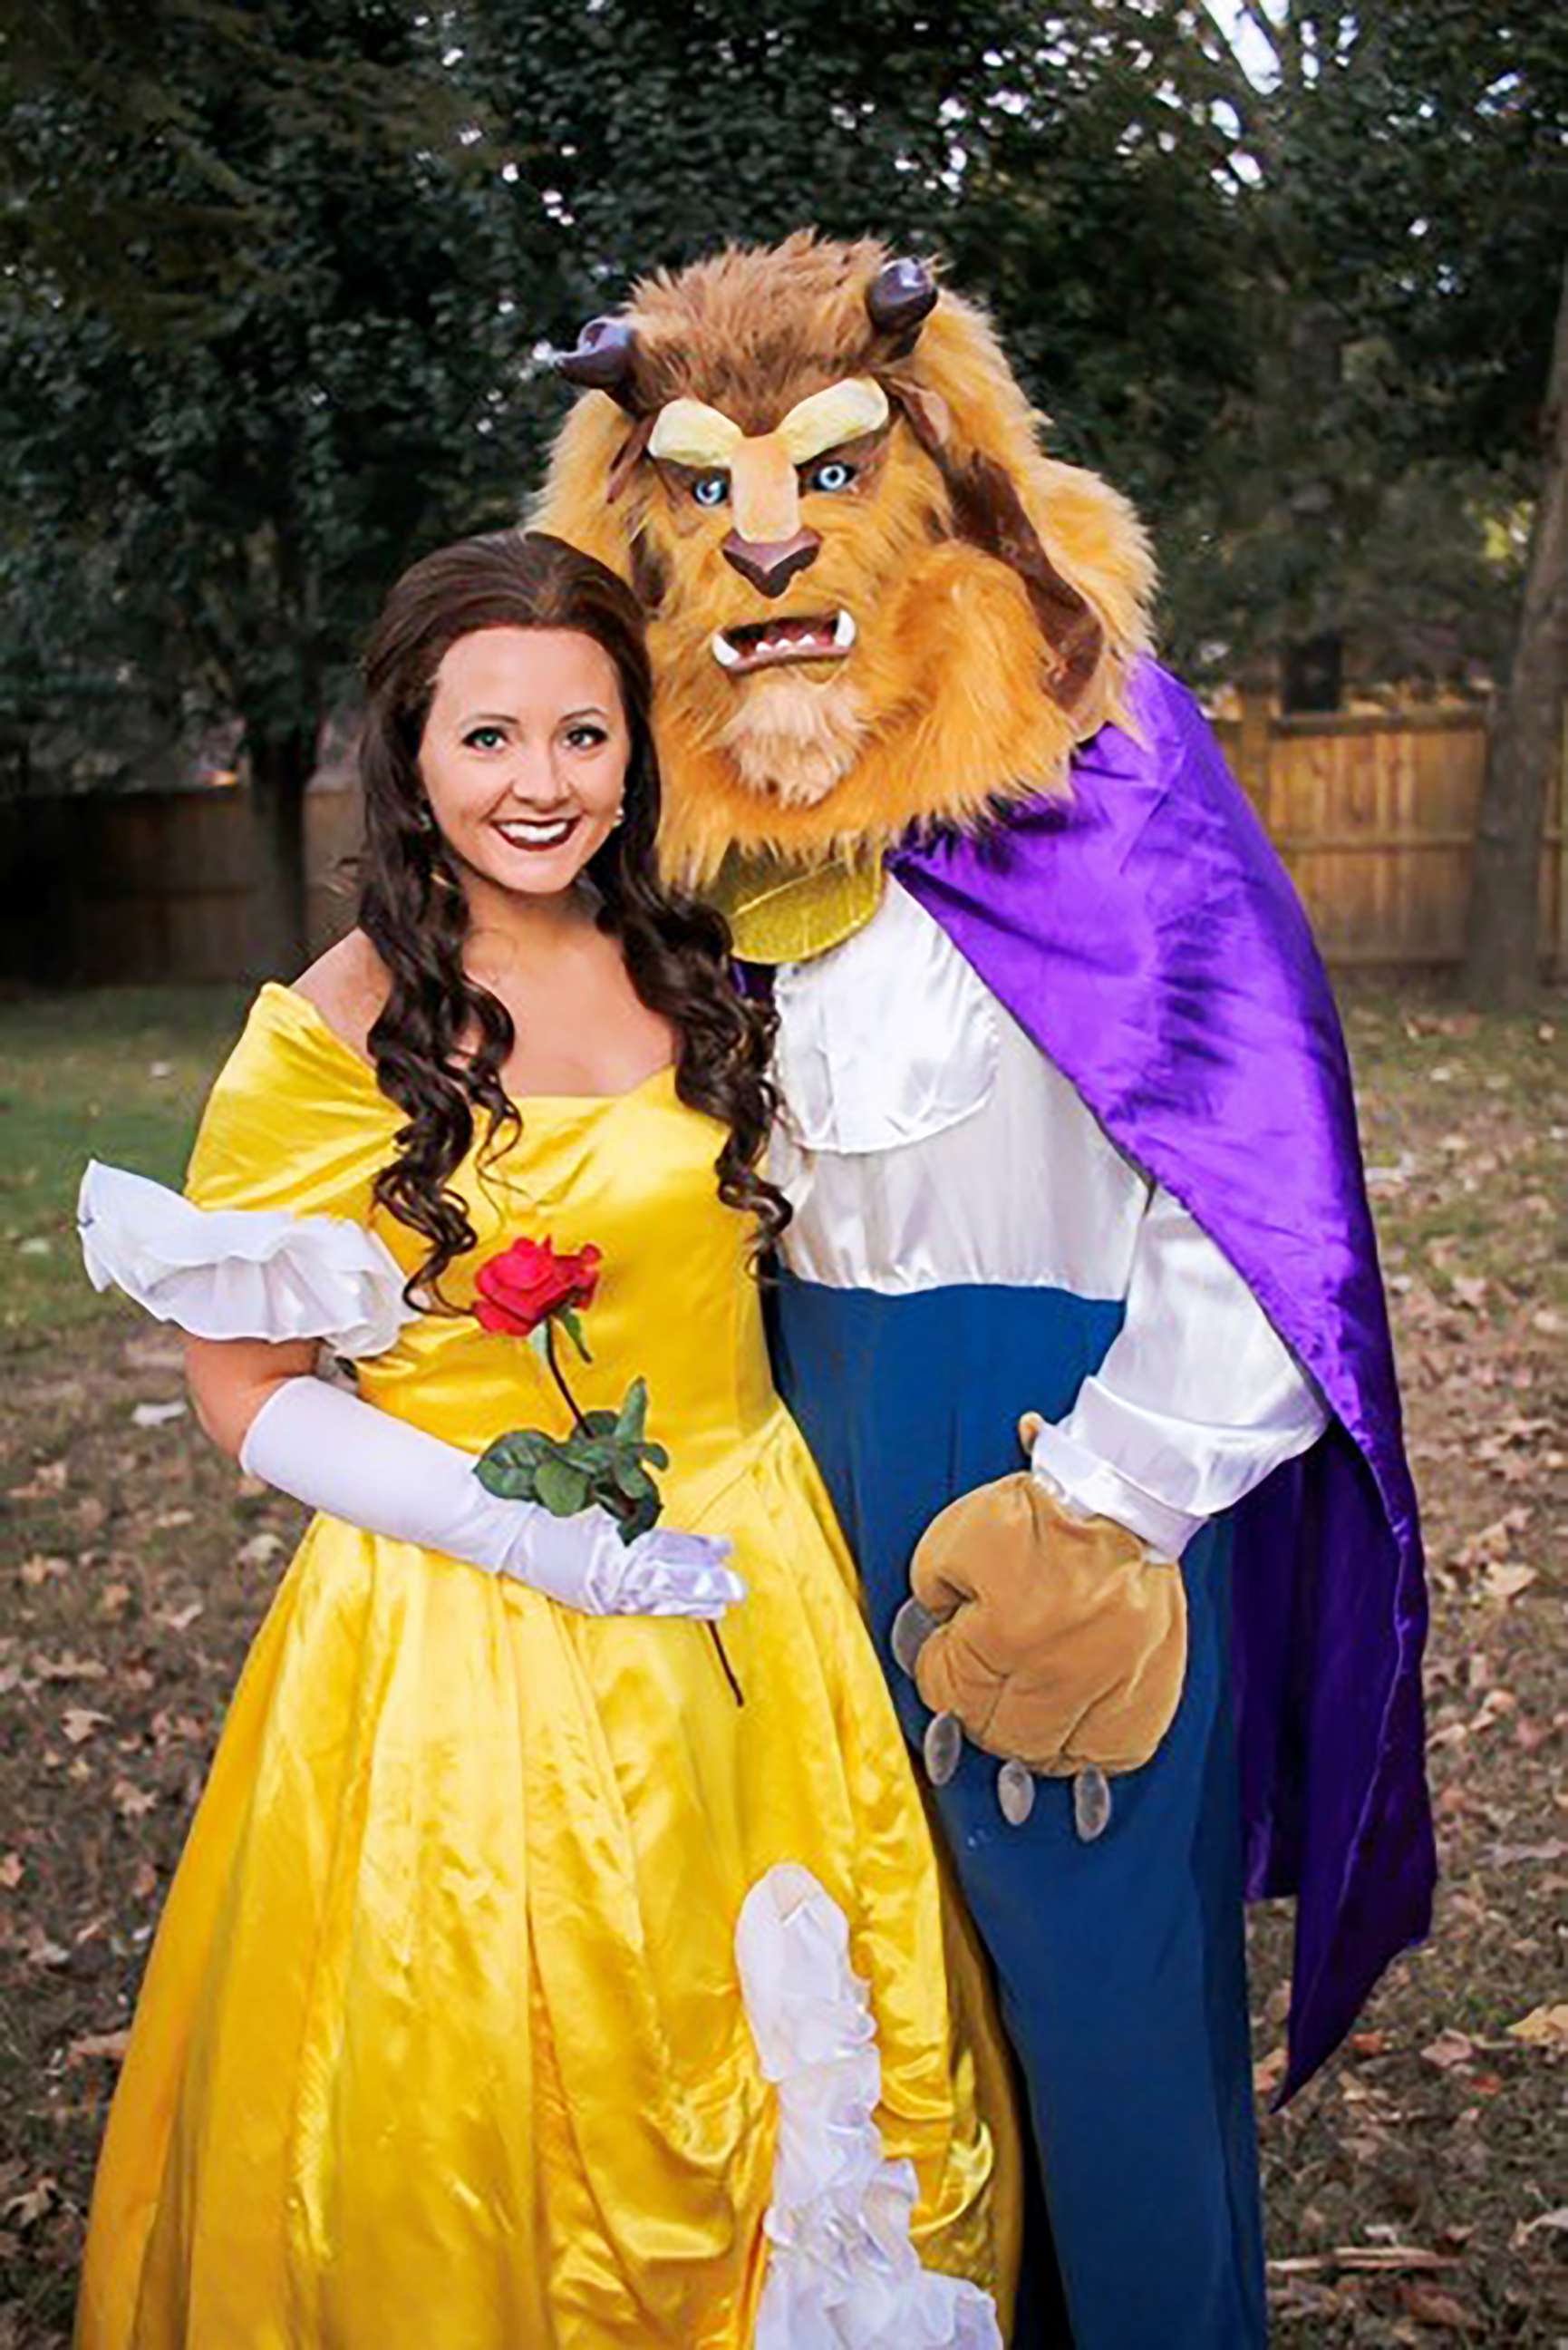 PHOTO: Kolby Davis, 26, and Hope Hagerman, 25, dressed as characters from "Beauty and the Beast" for Halloween.
